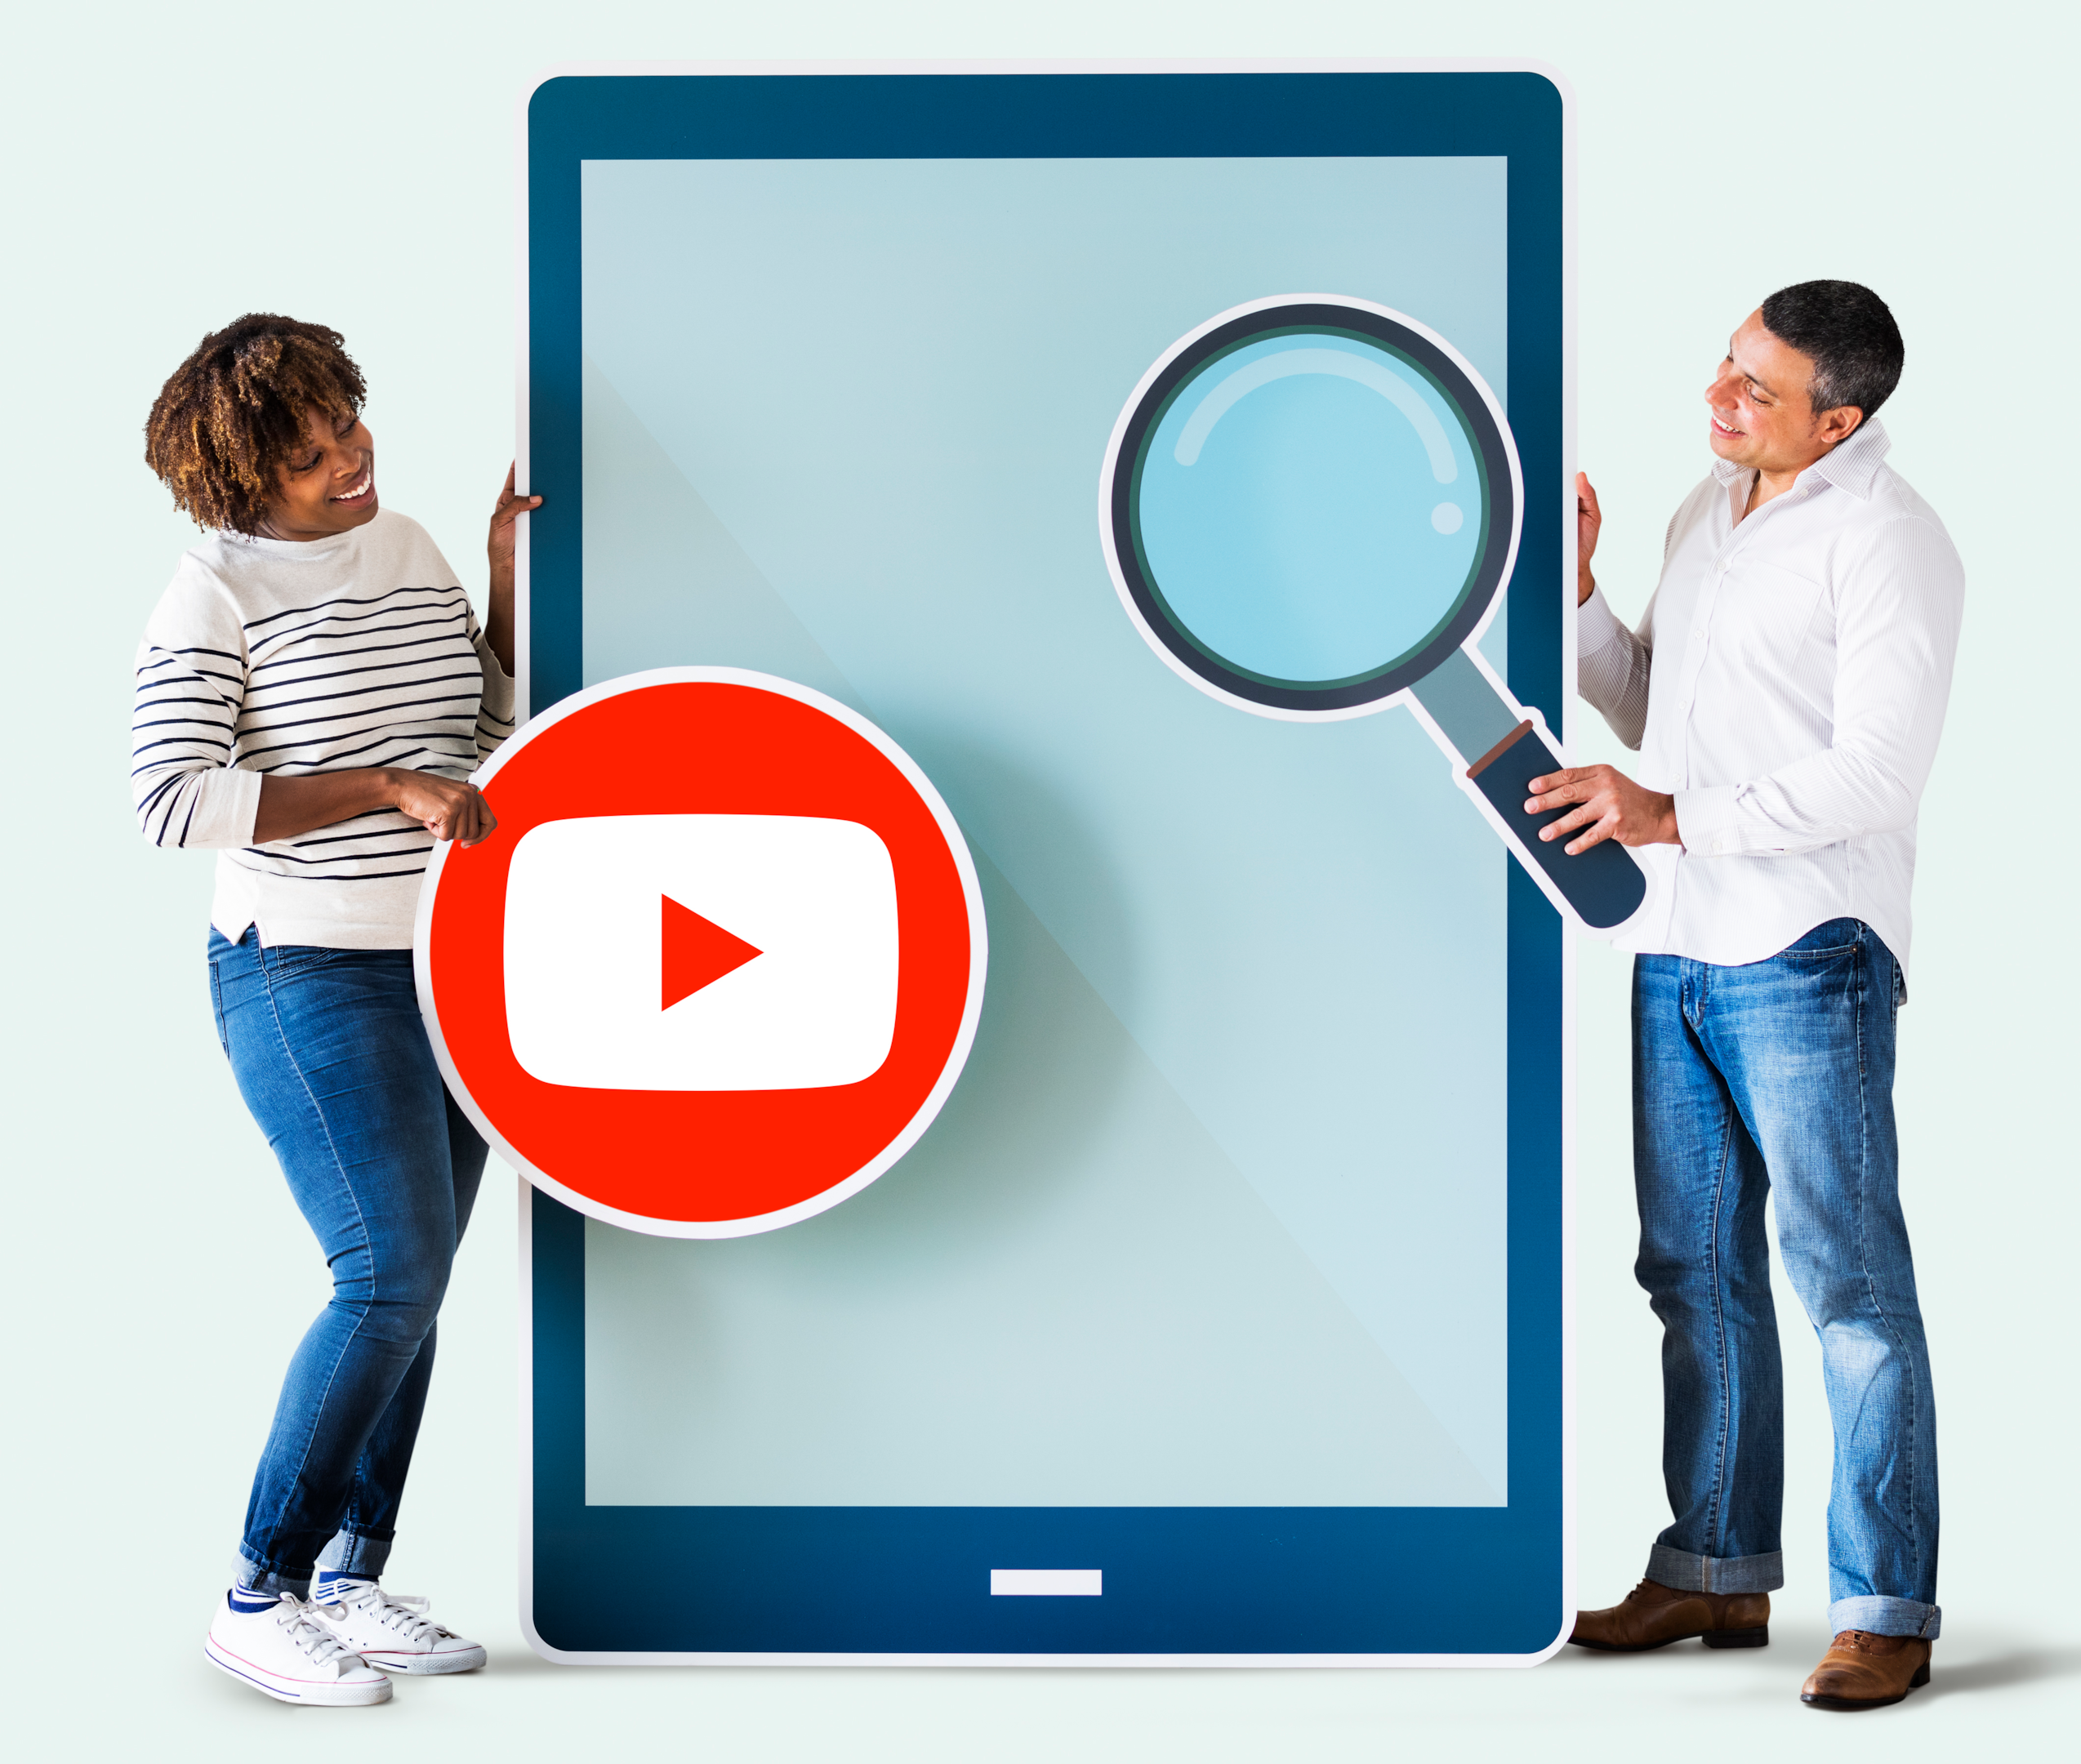 Video SEO is your key to content visibility